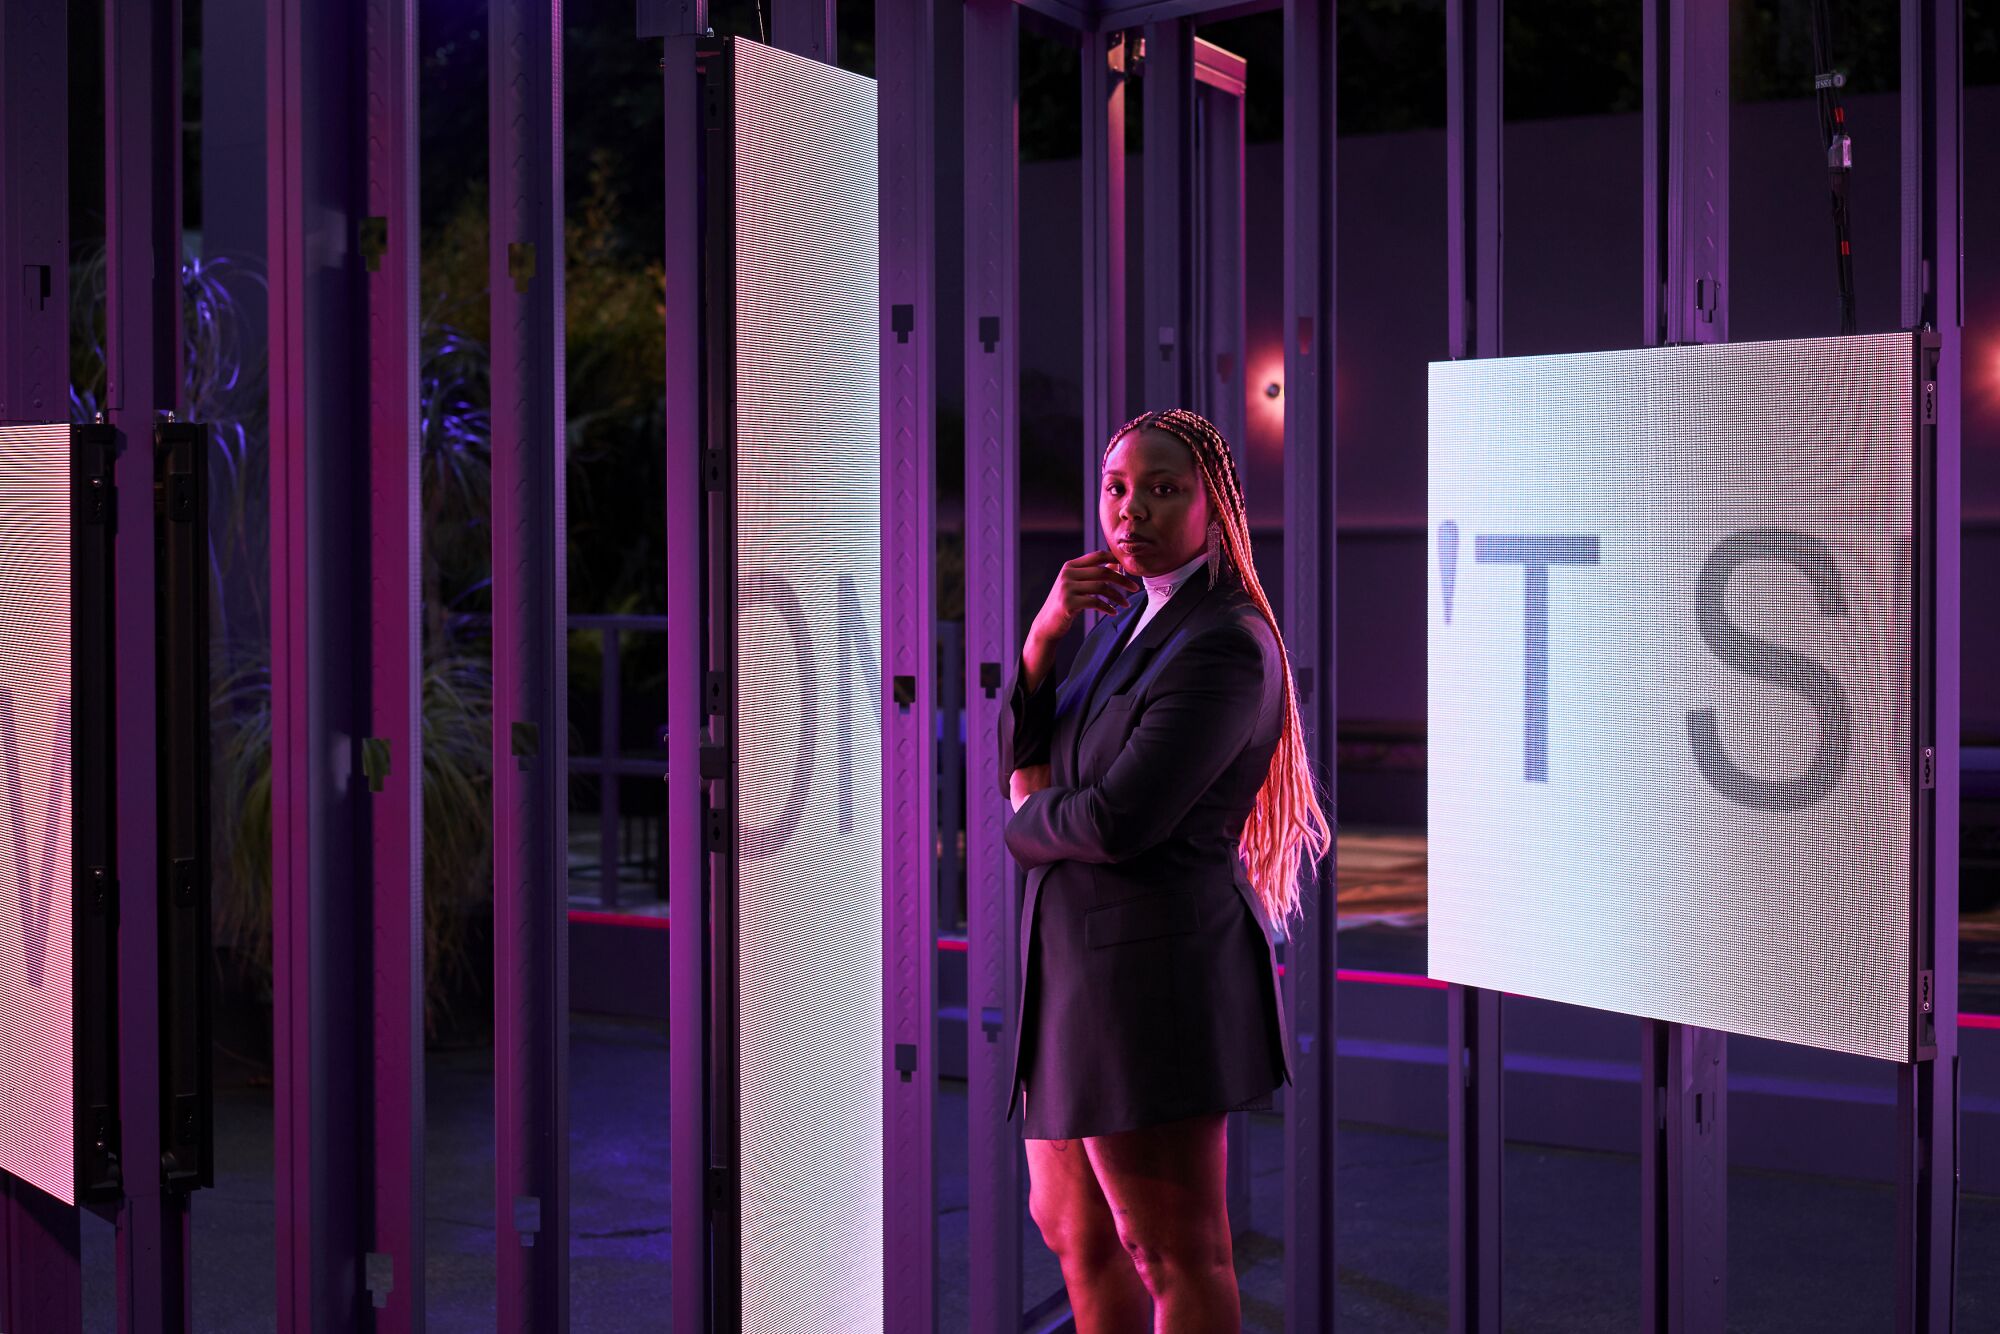 A woman with pink braids stands in front of screens projecting letters